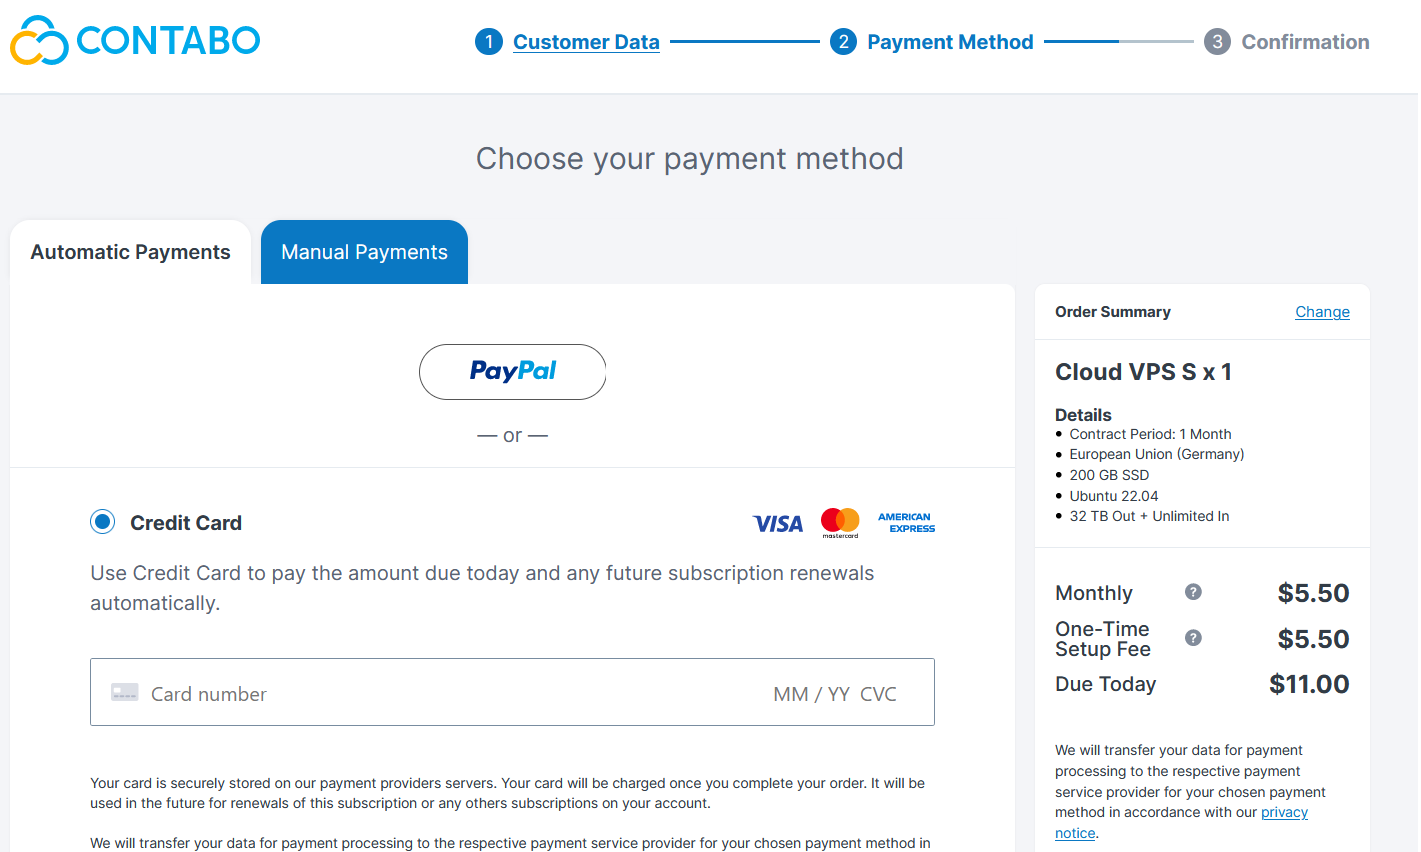 Contabo VPS Payment Method